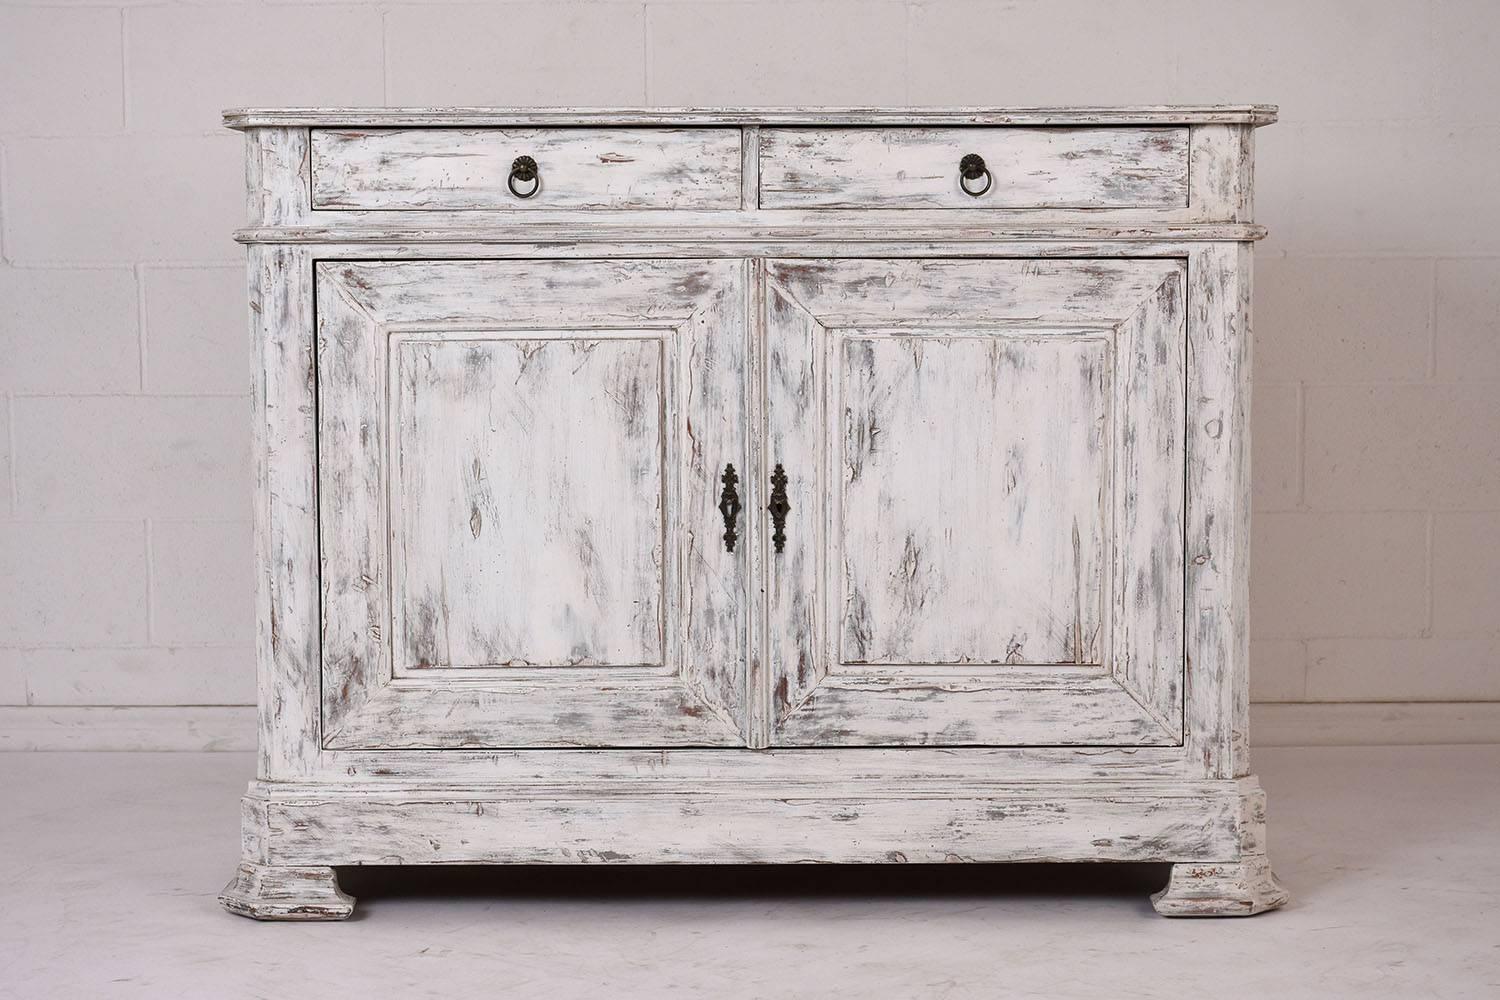 This 1970s French Louis Philippe-style buffet is made of mahogany wood painted in a off white and grey color combination with a distressed finish. There are two drawers at the top with decorative brass pulls. Below there are two cabinet doors with a